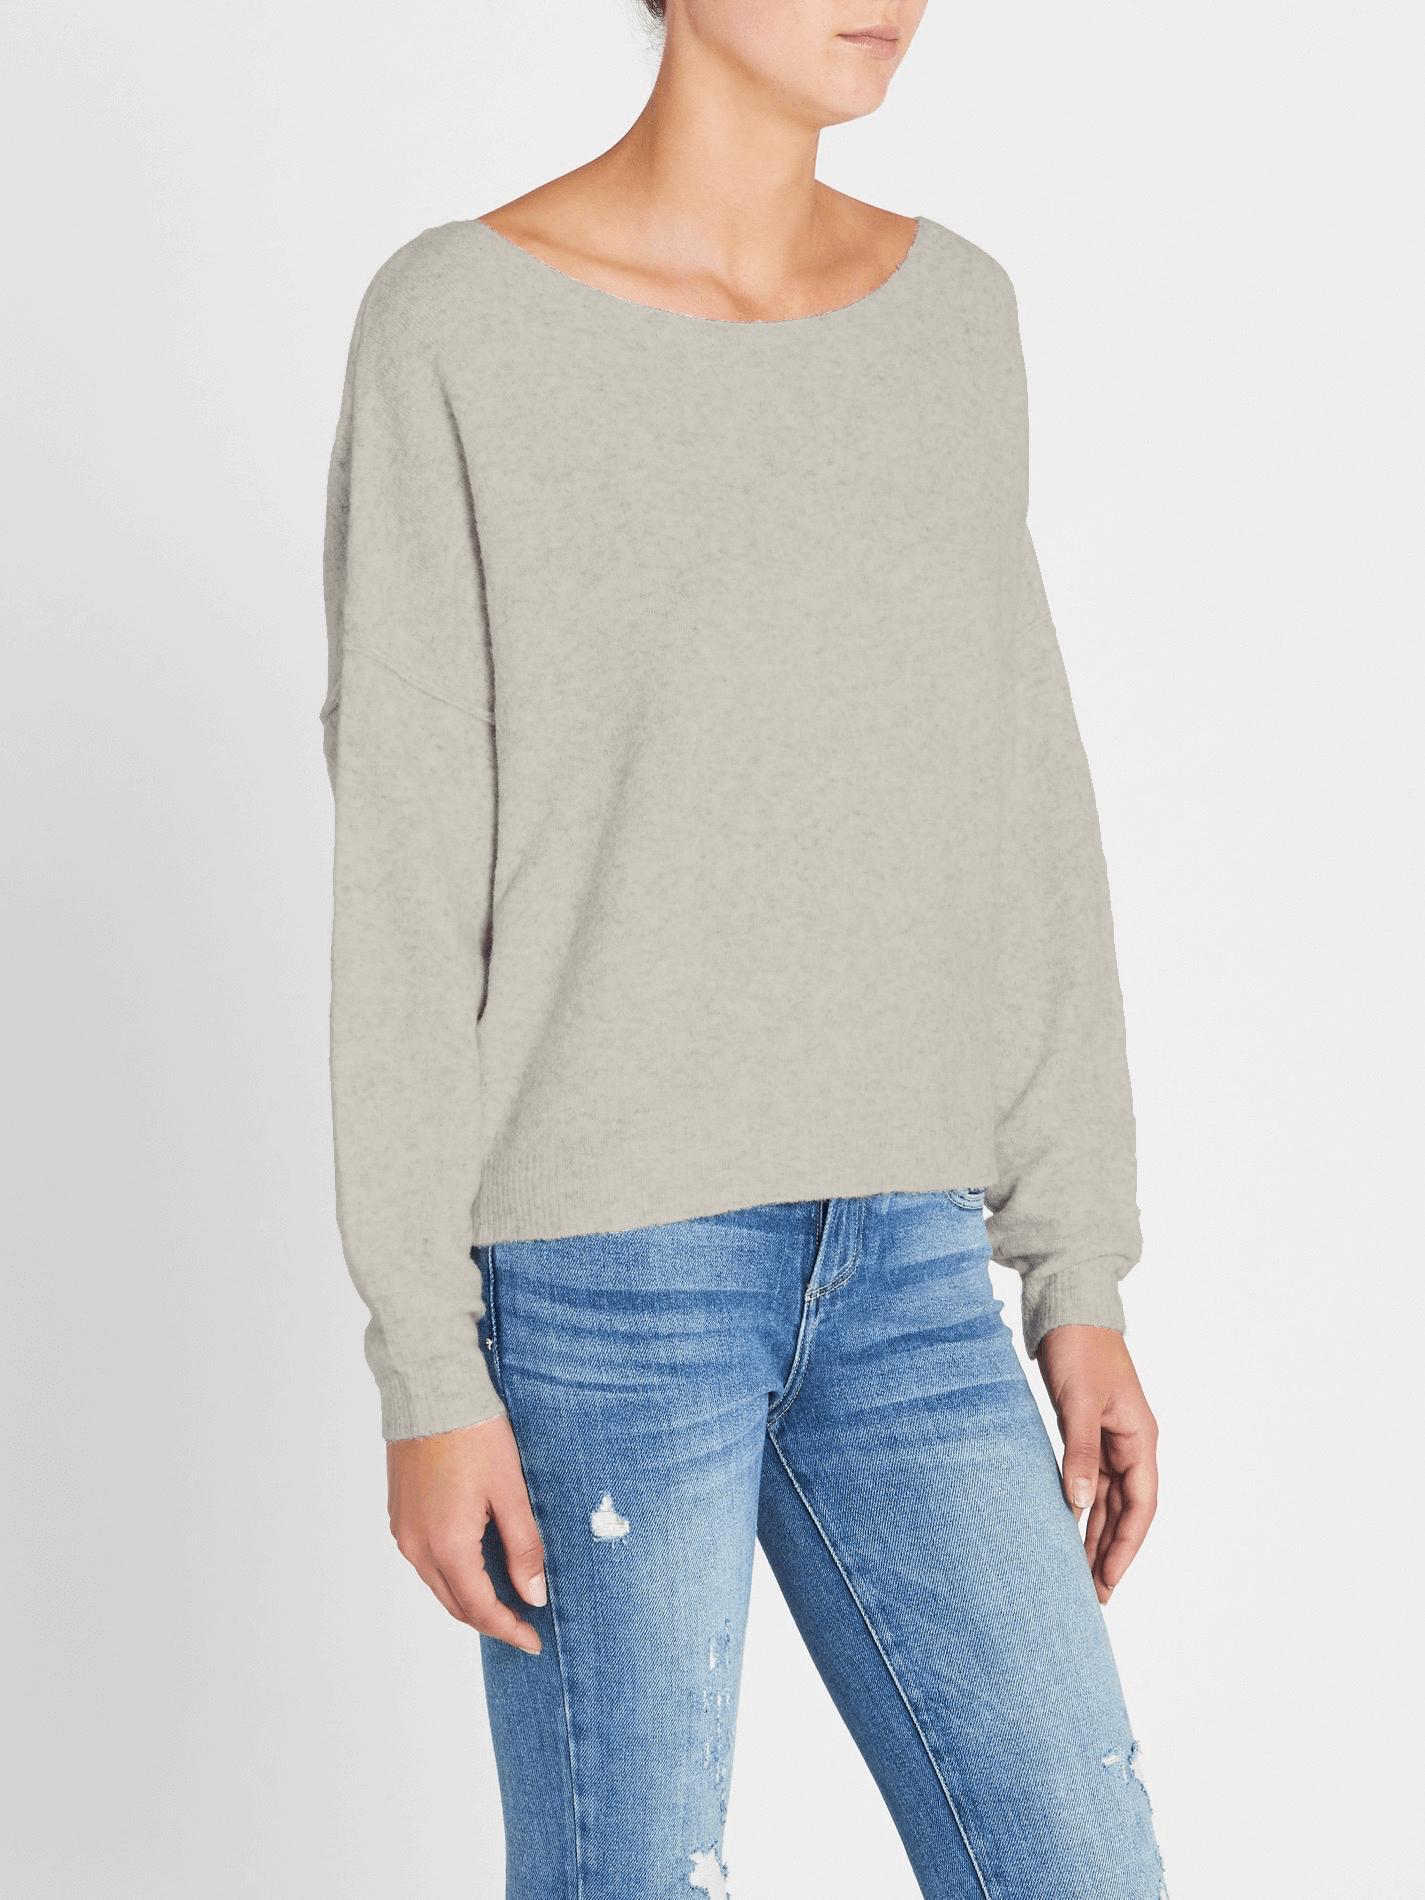 American Vintage Wool Damsville Pullover in Natural | Lyst